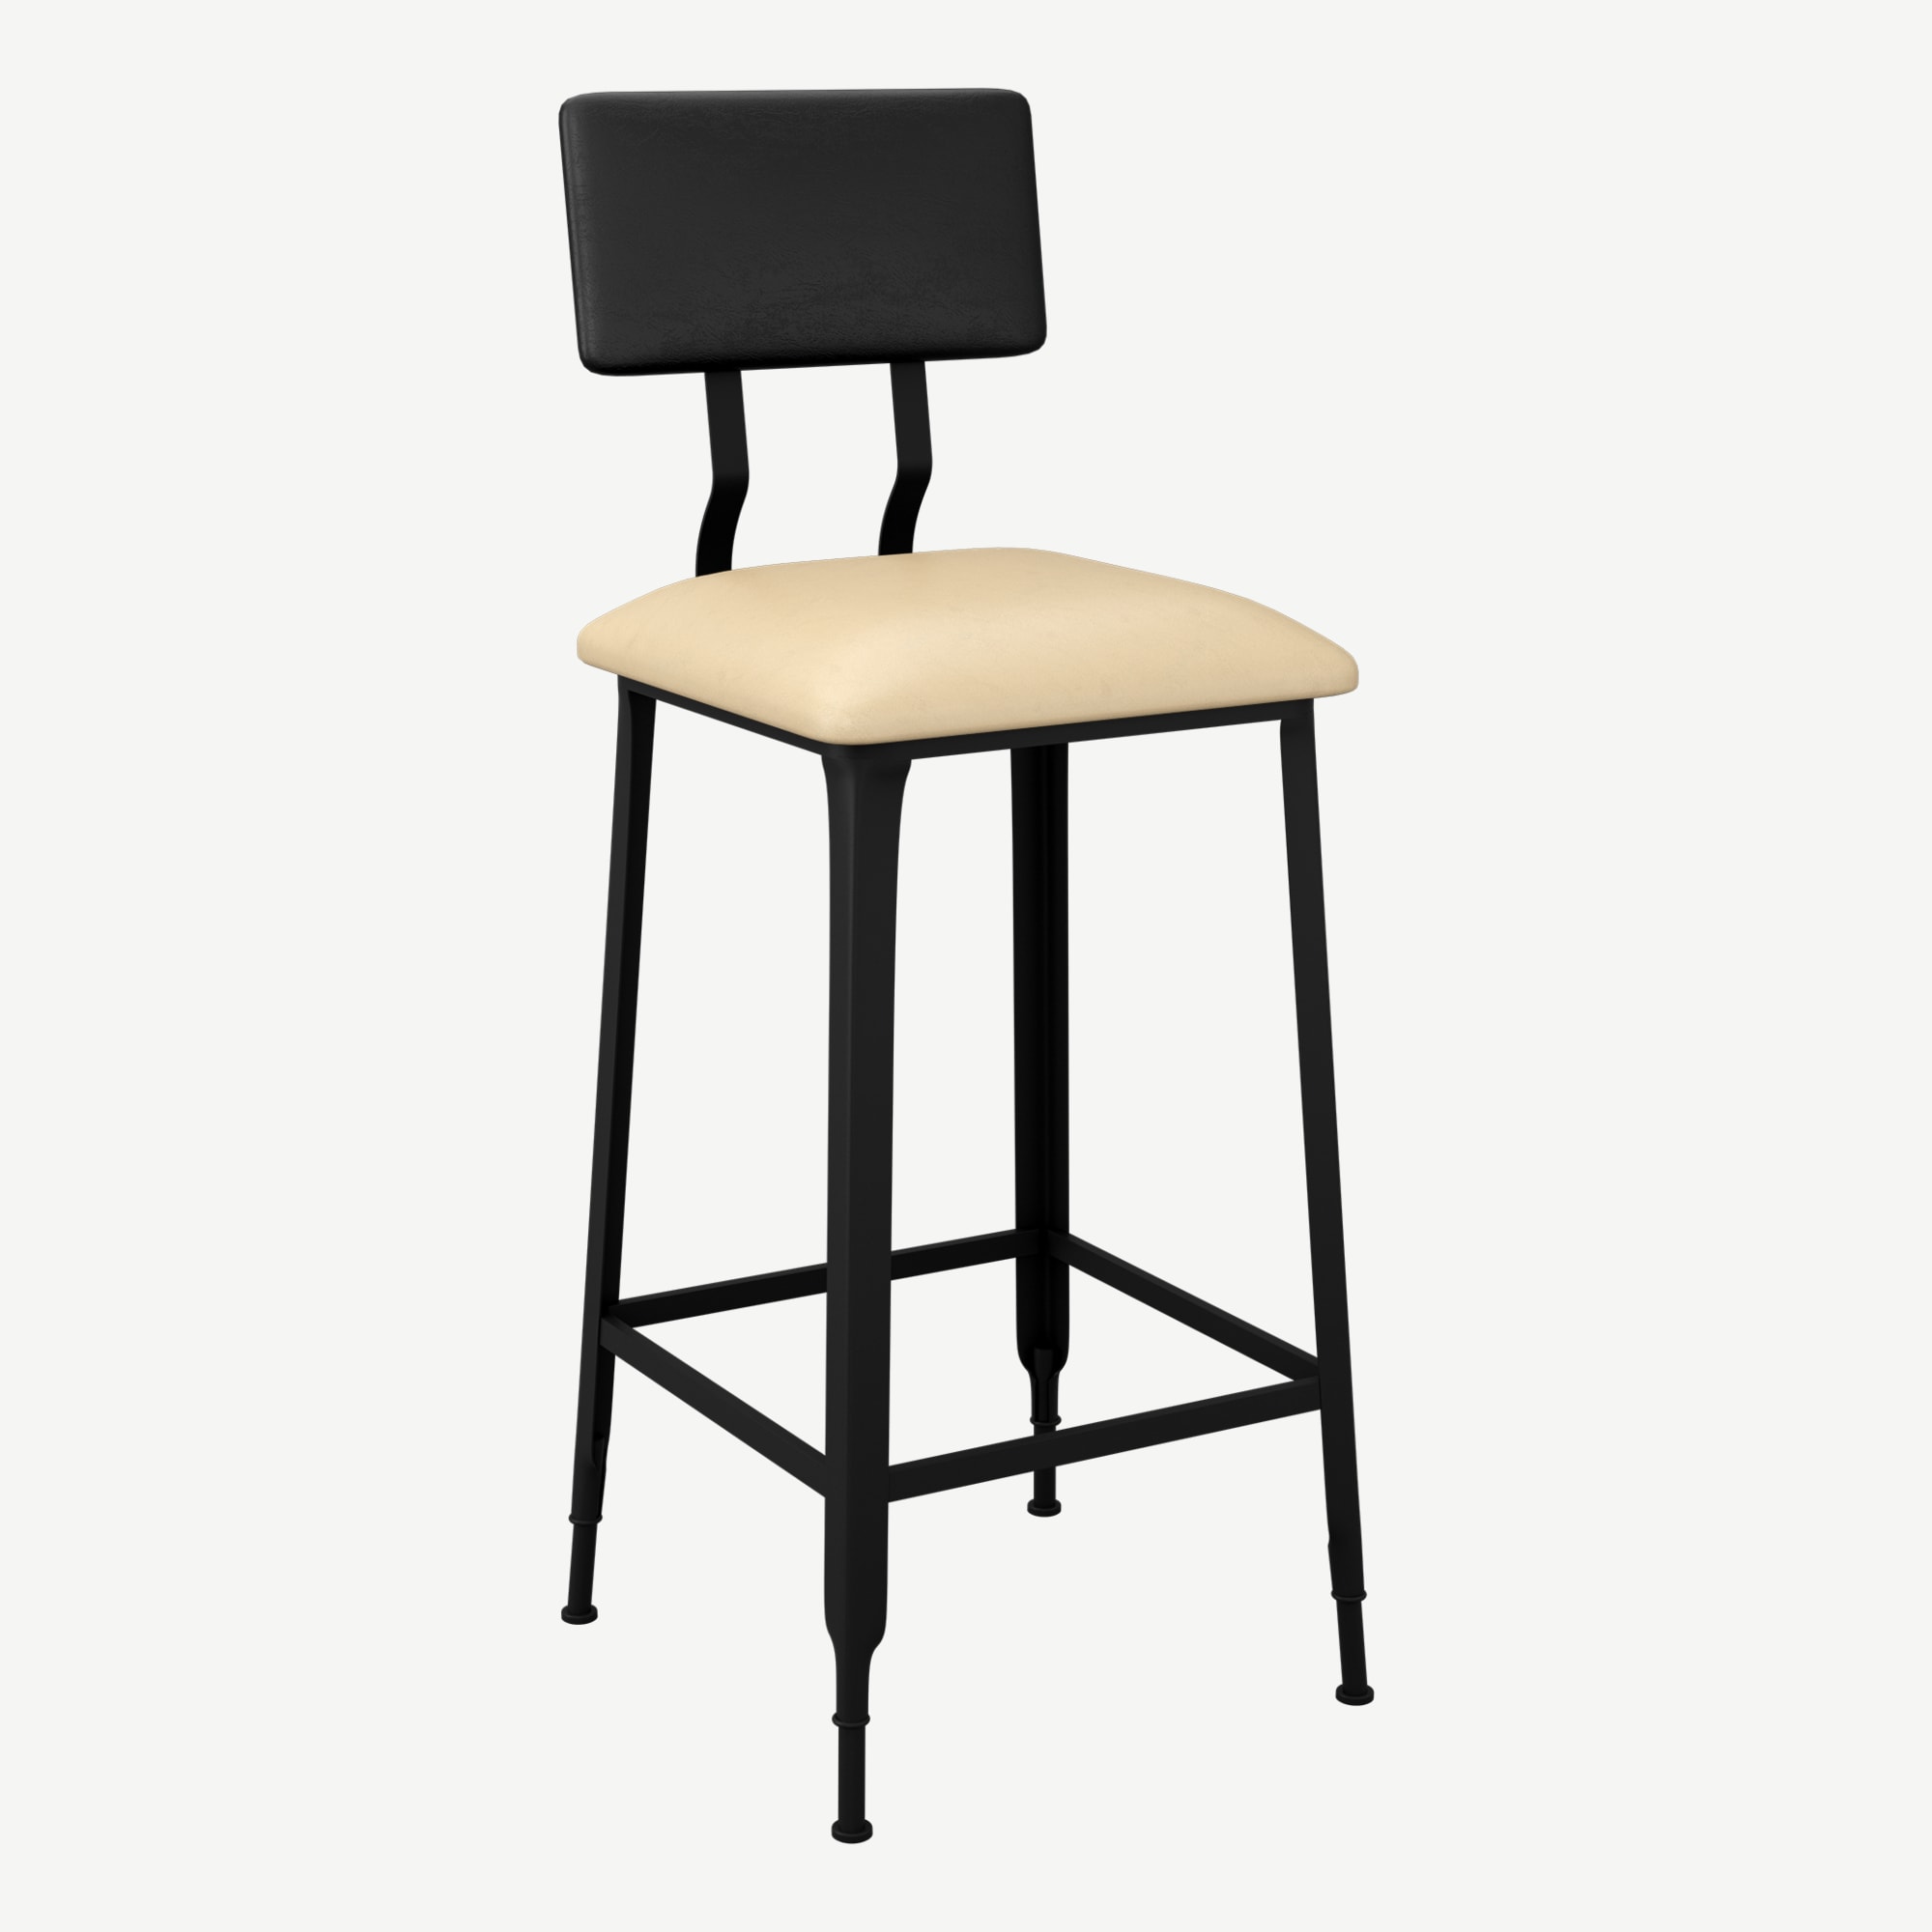 Massello Industrial Series Black Metal Bar Stool with Padded Back